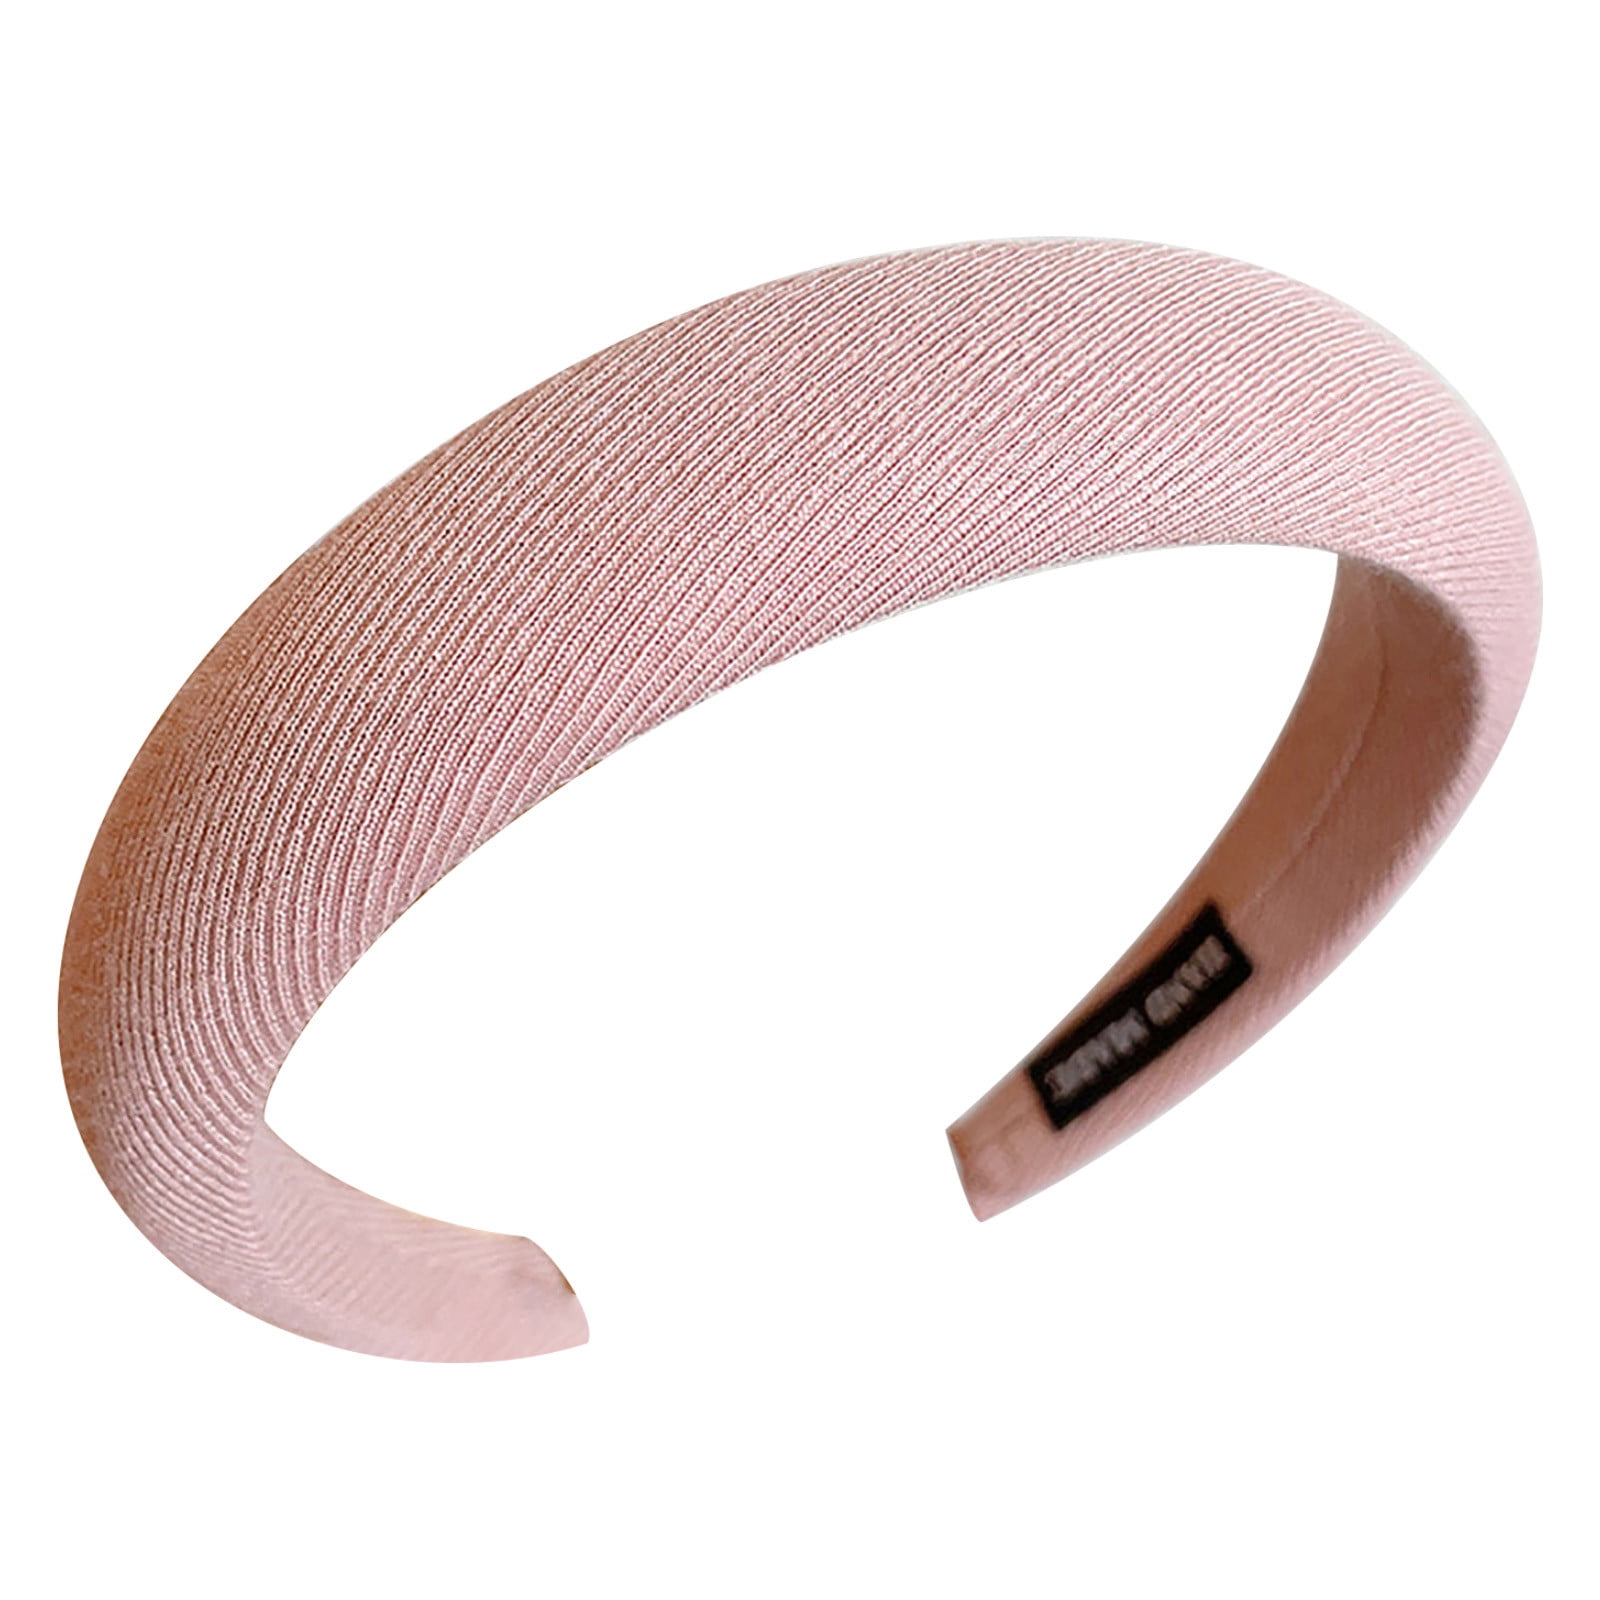 Pompotops Wide Hairbands for Women Girls Autumn and Winter Sponge Padded Head Bands Hair Hoop Party Hair Accessories, Women's, Size: 1XL, Pink